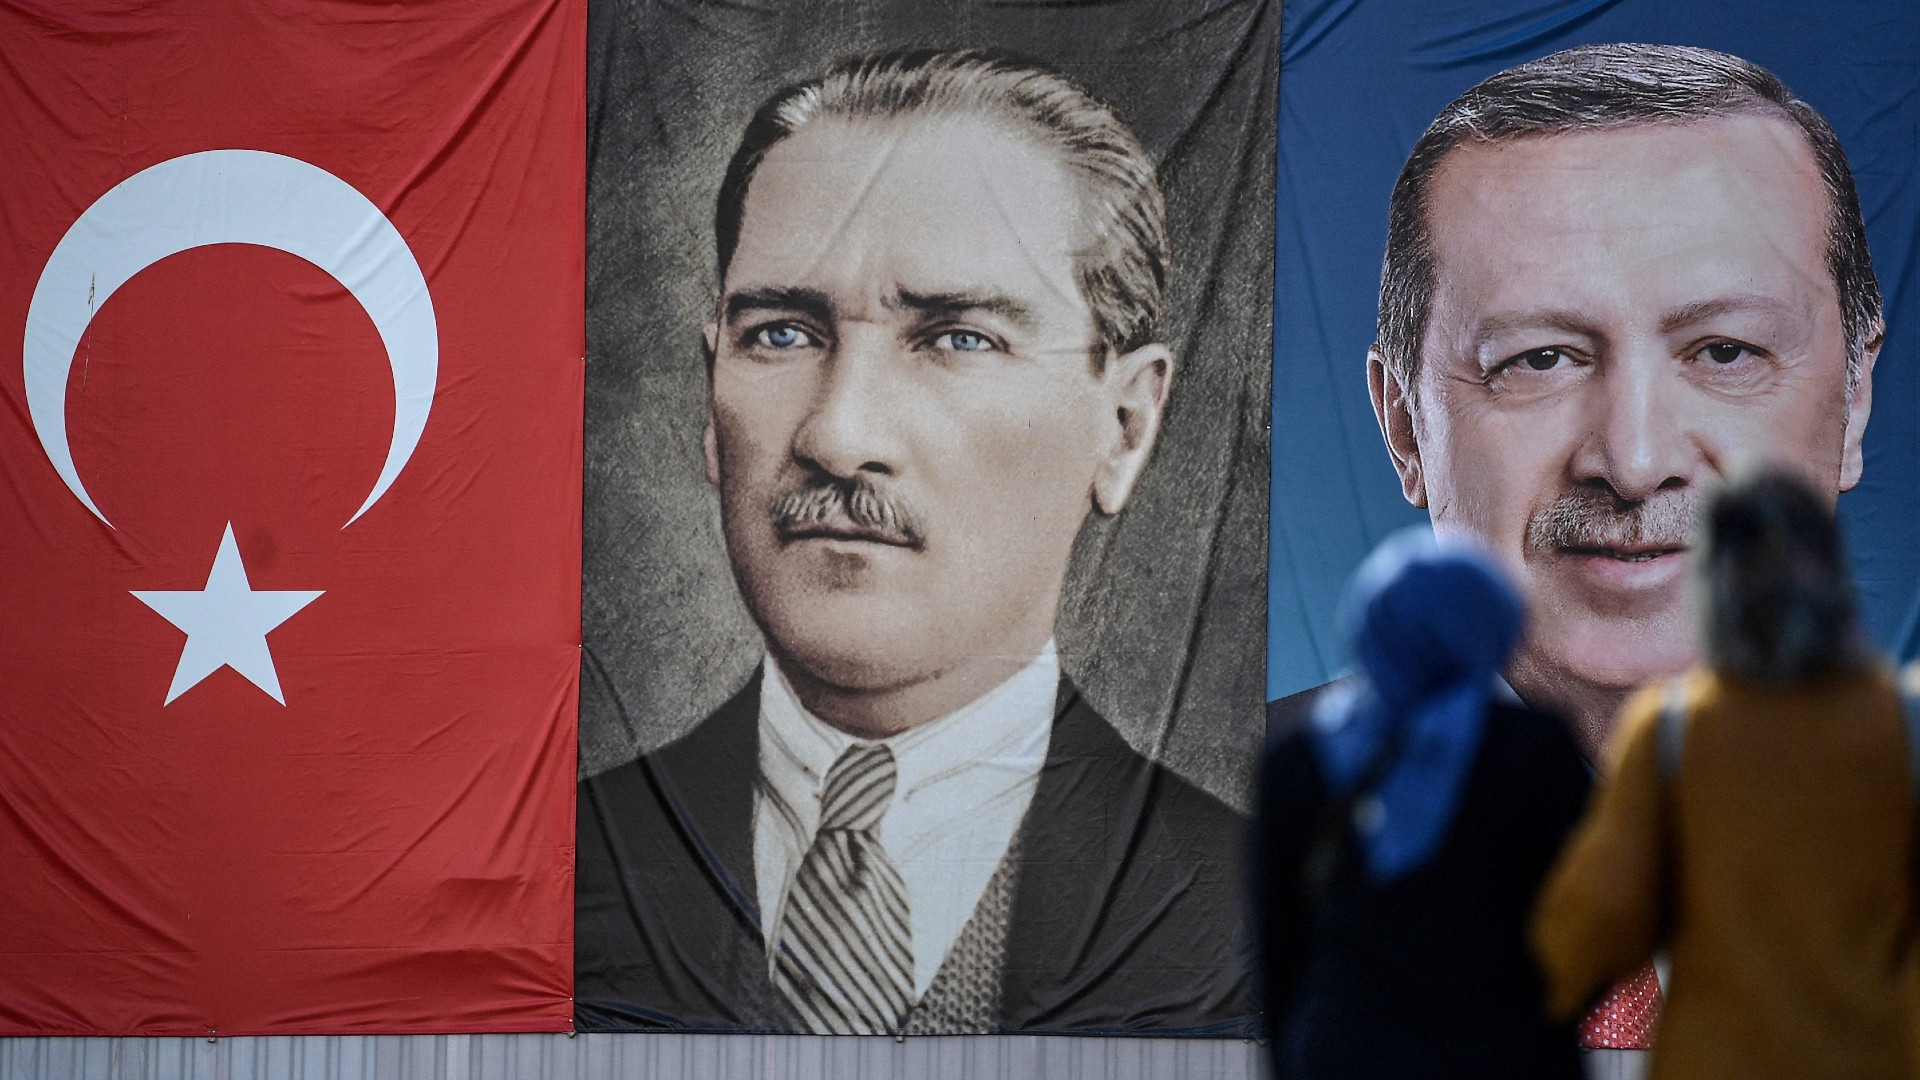 Two women stand in front of the portraits of Turkish President Recep Tayyip Erdogan, right, and founder of modern Turkey Mustafa Kemal Ataturk, left, at Emininonu district in Istanbul on 11 May 2018 (Ozan Kose/AFP)